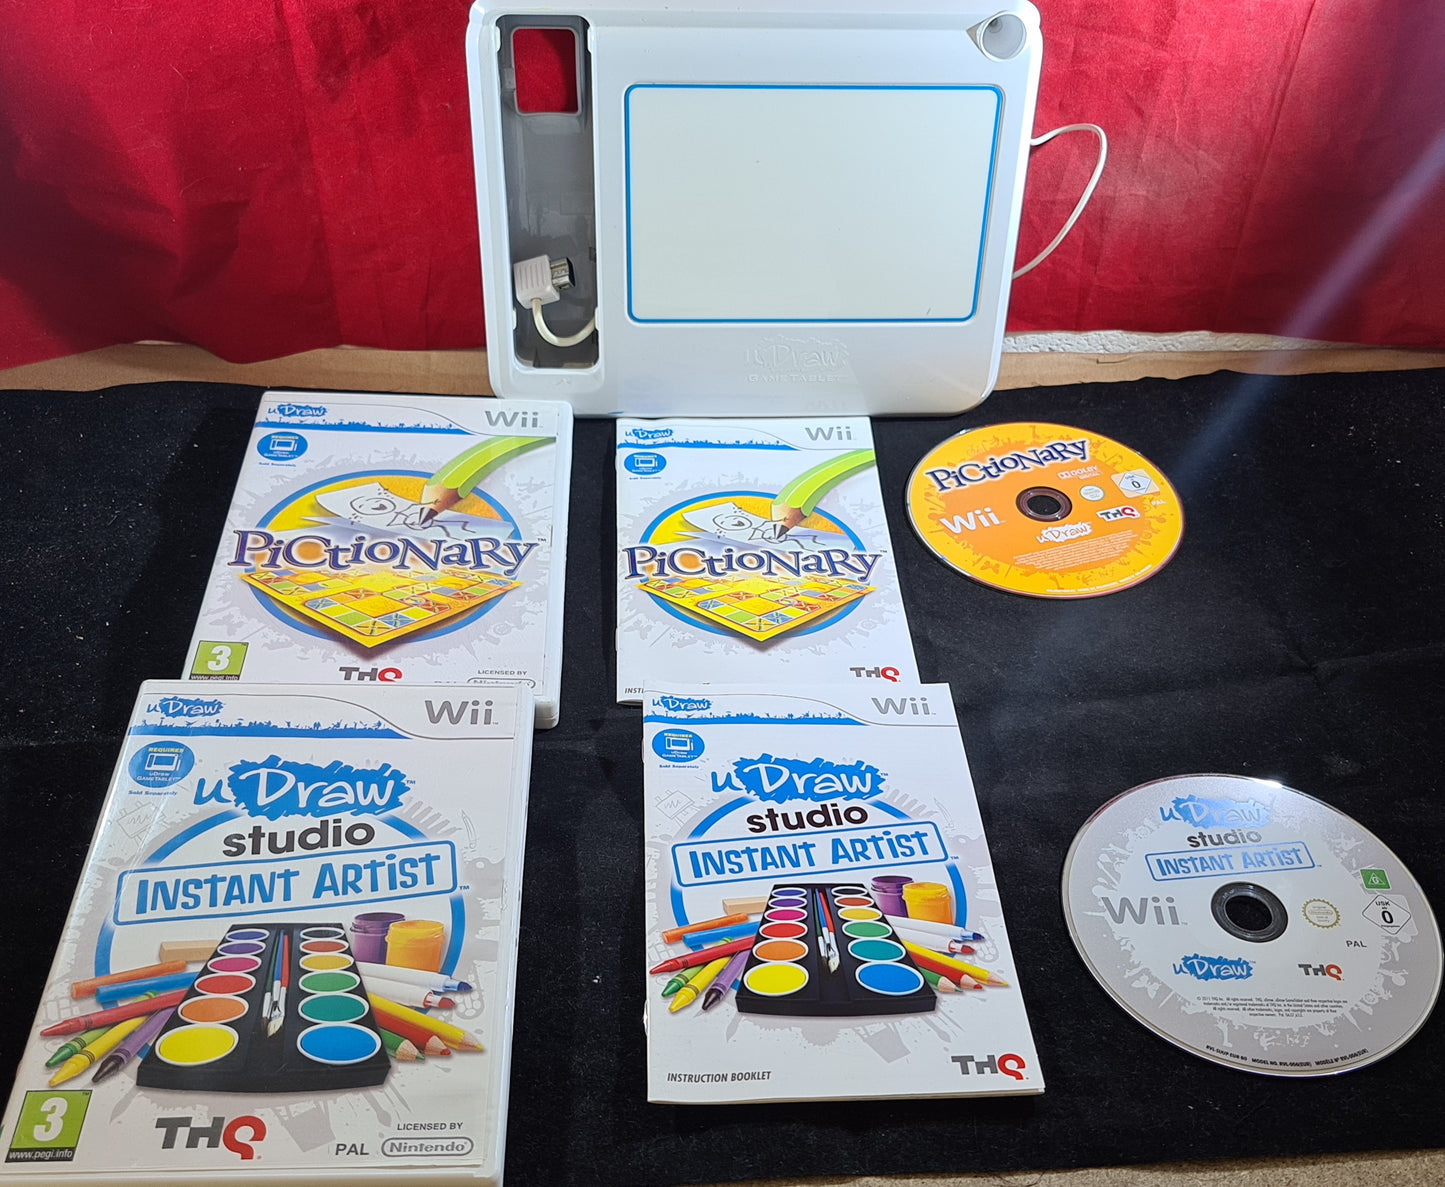 Udraw Tablet with Instant Artist and Pictionary Nintendo Wii Game & Accessory Bundle